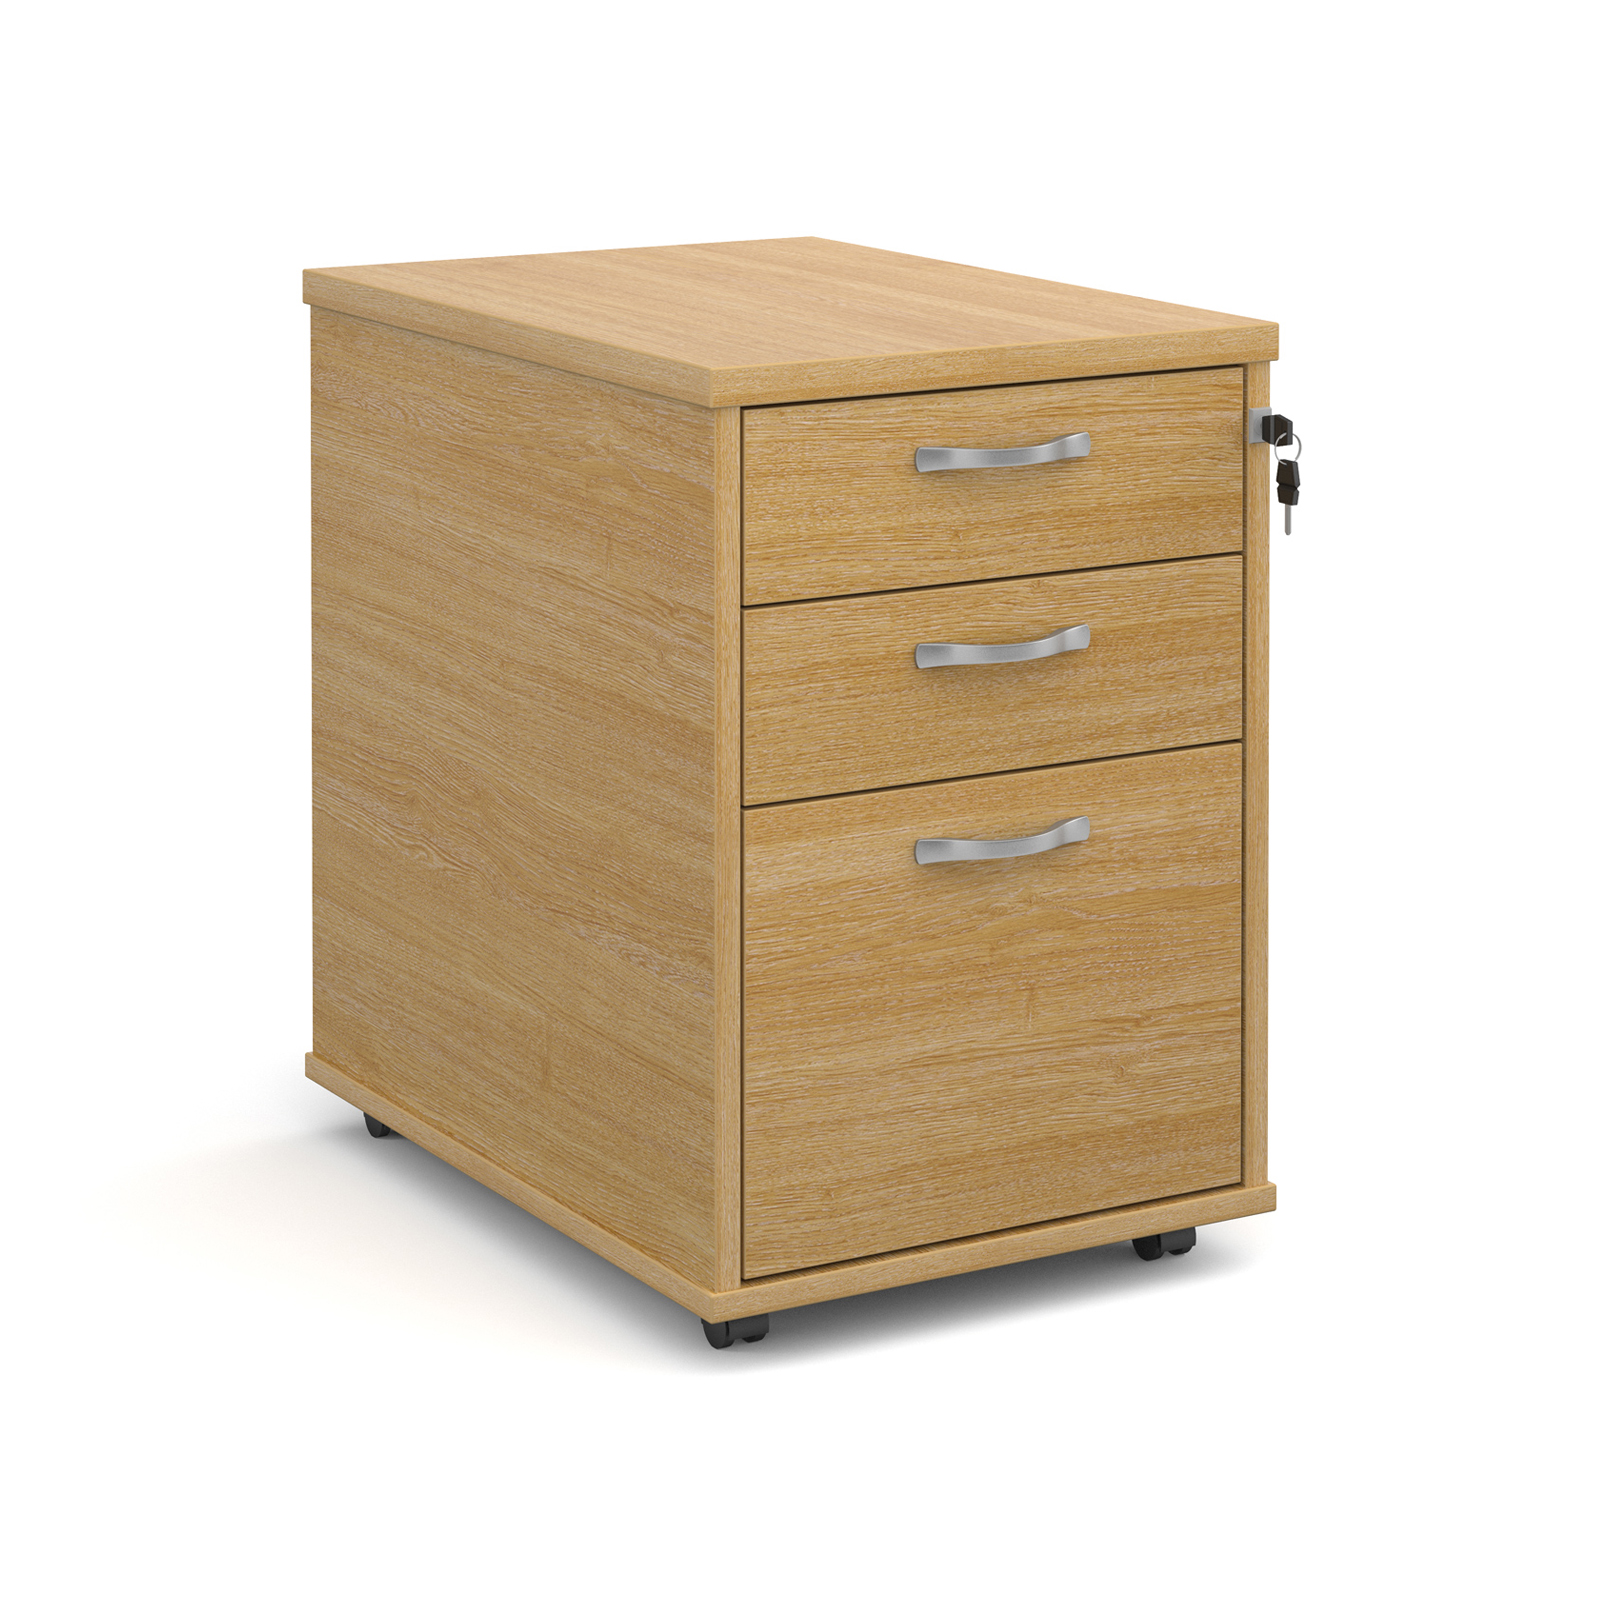 3 Drawer Tall mobile 3 drawer pedestal with silver handles 600mm deep - oak